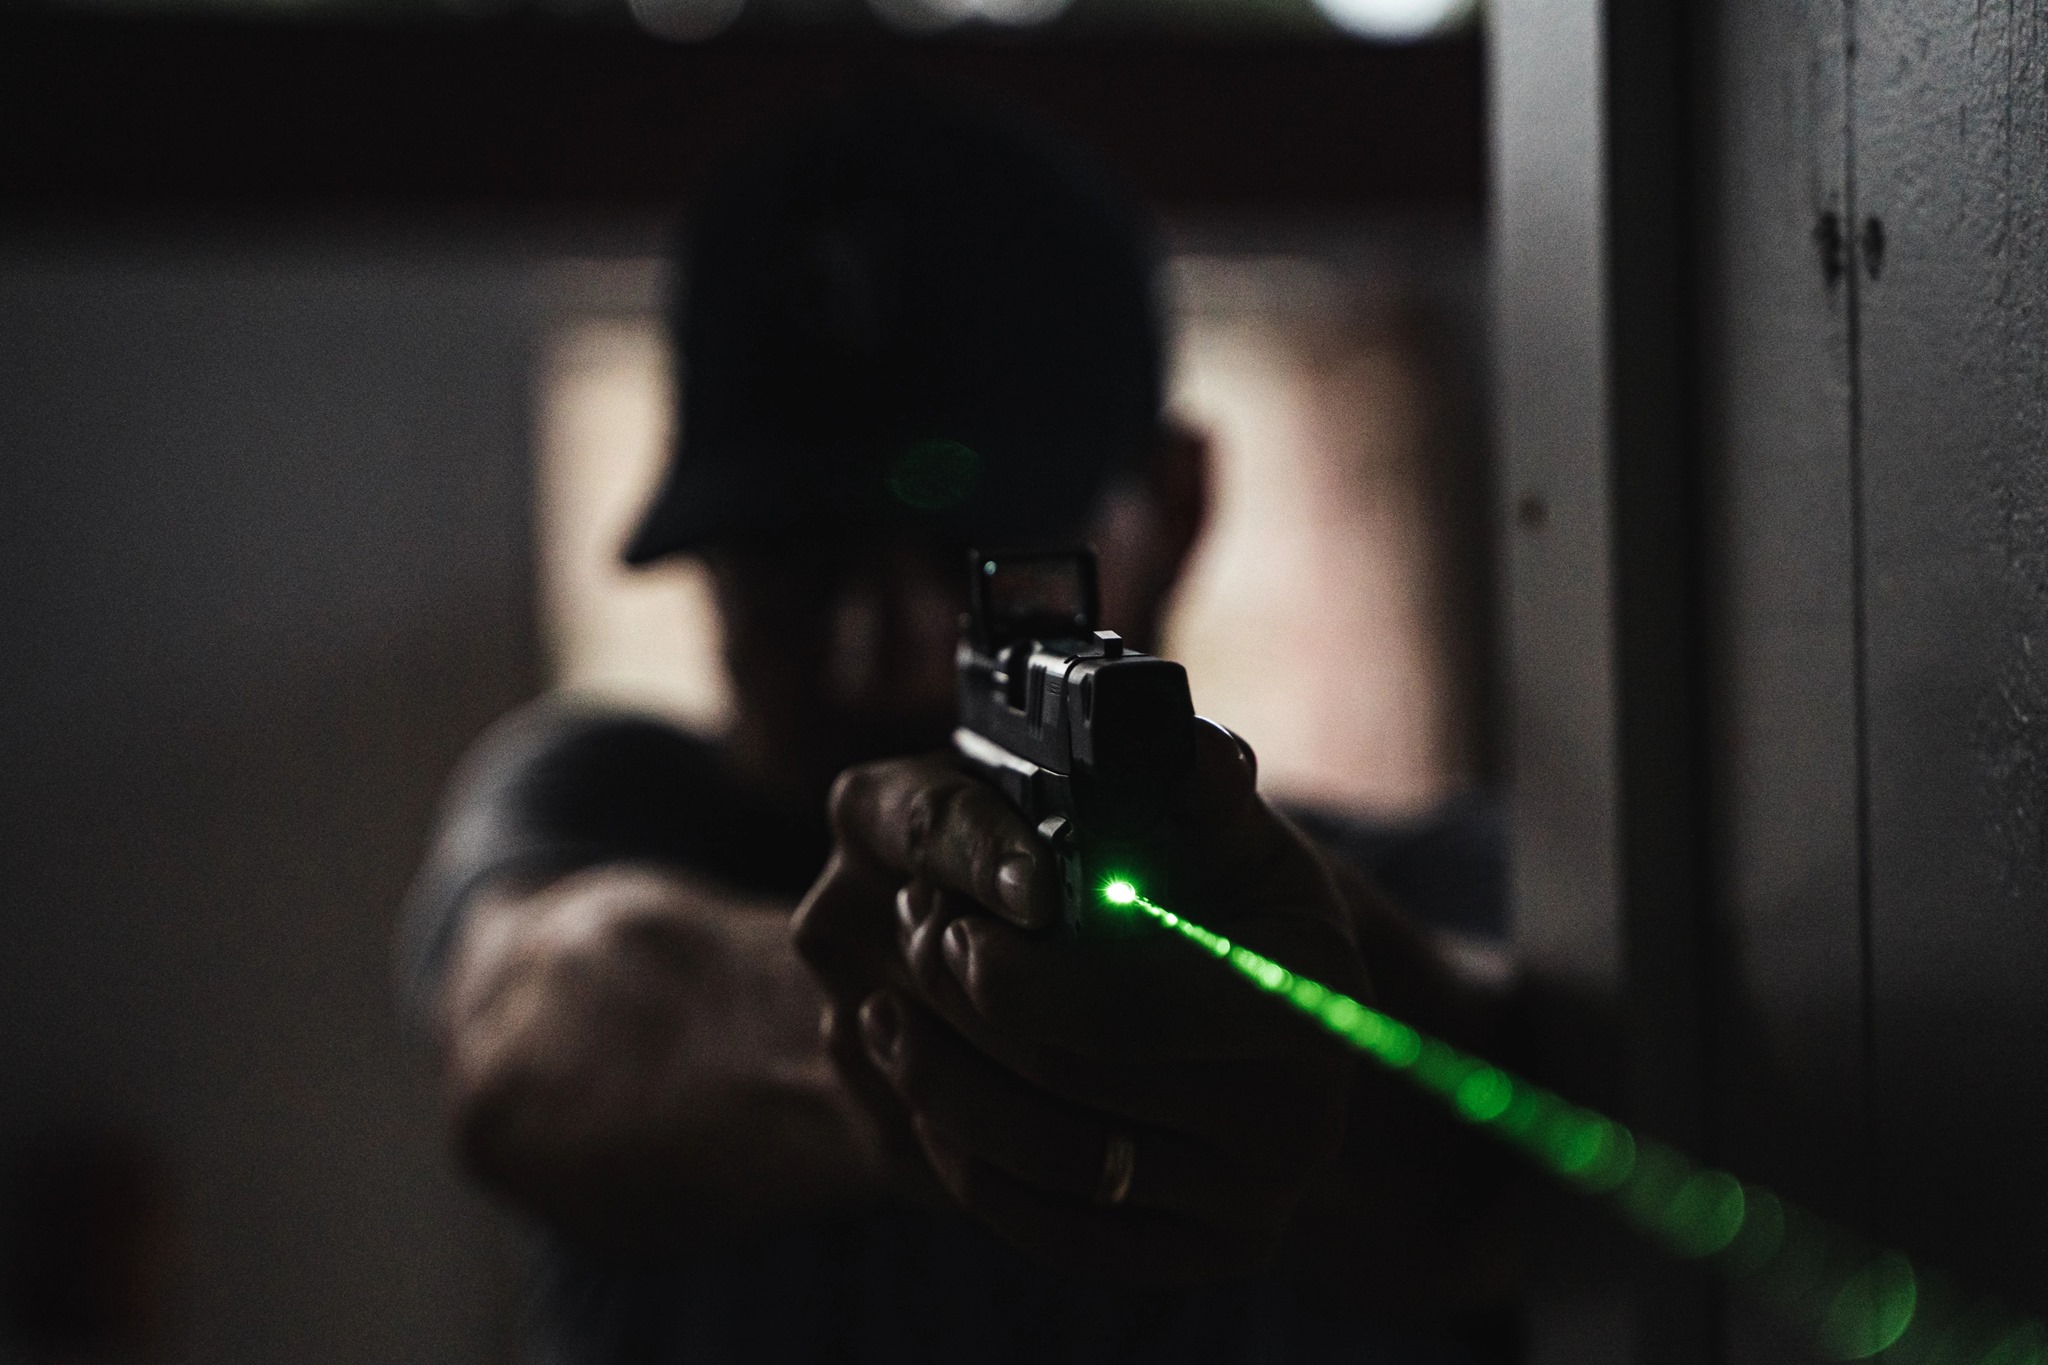 Complete Buyers' Guide to Laser Sights